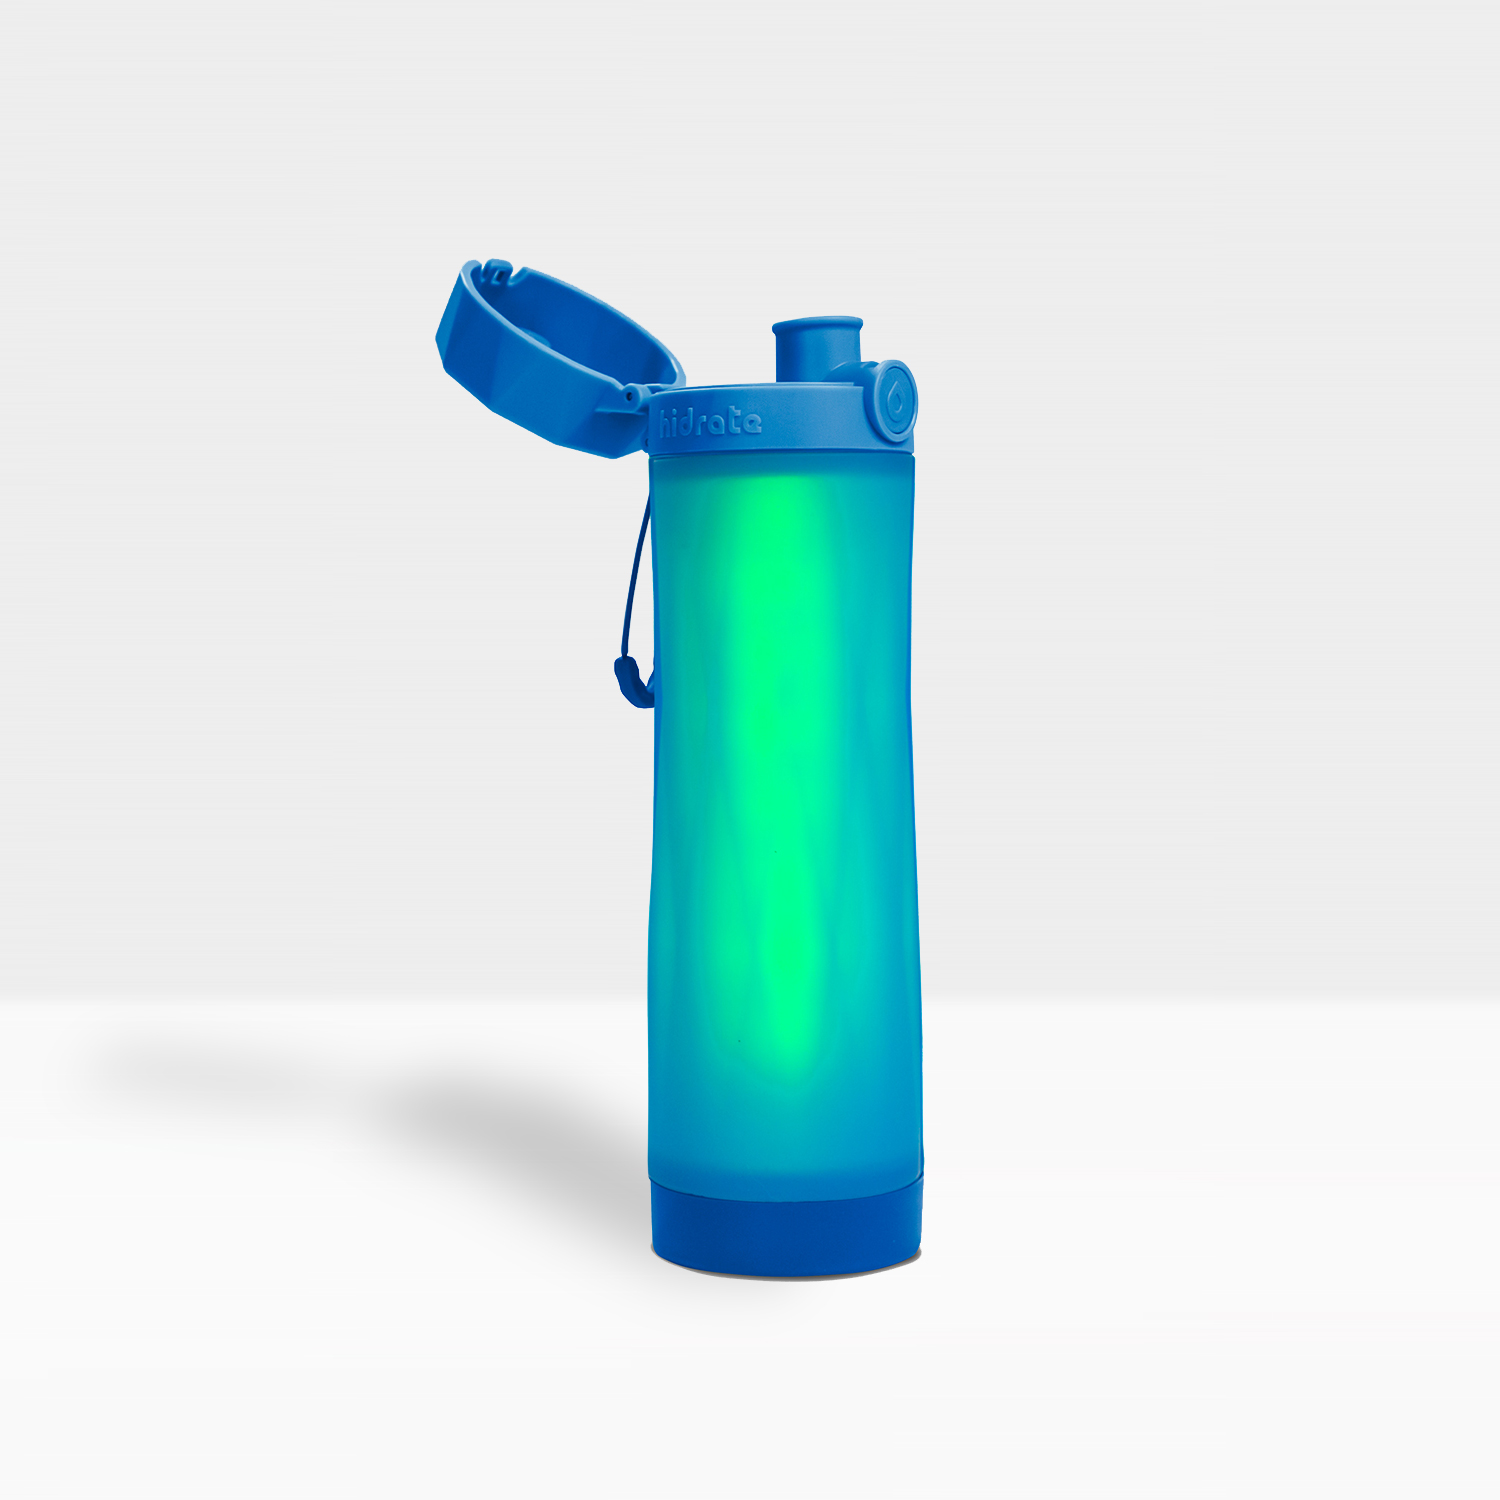 Hidrate Spark 3.0 – The Smart Water 